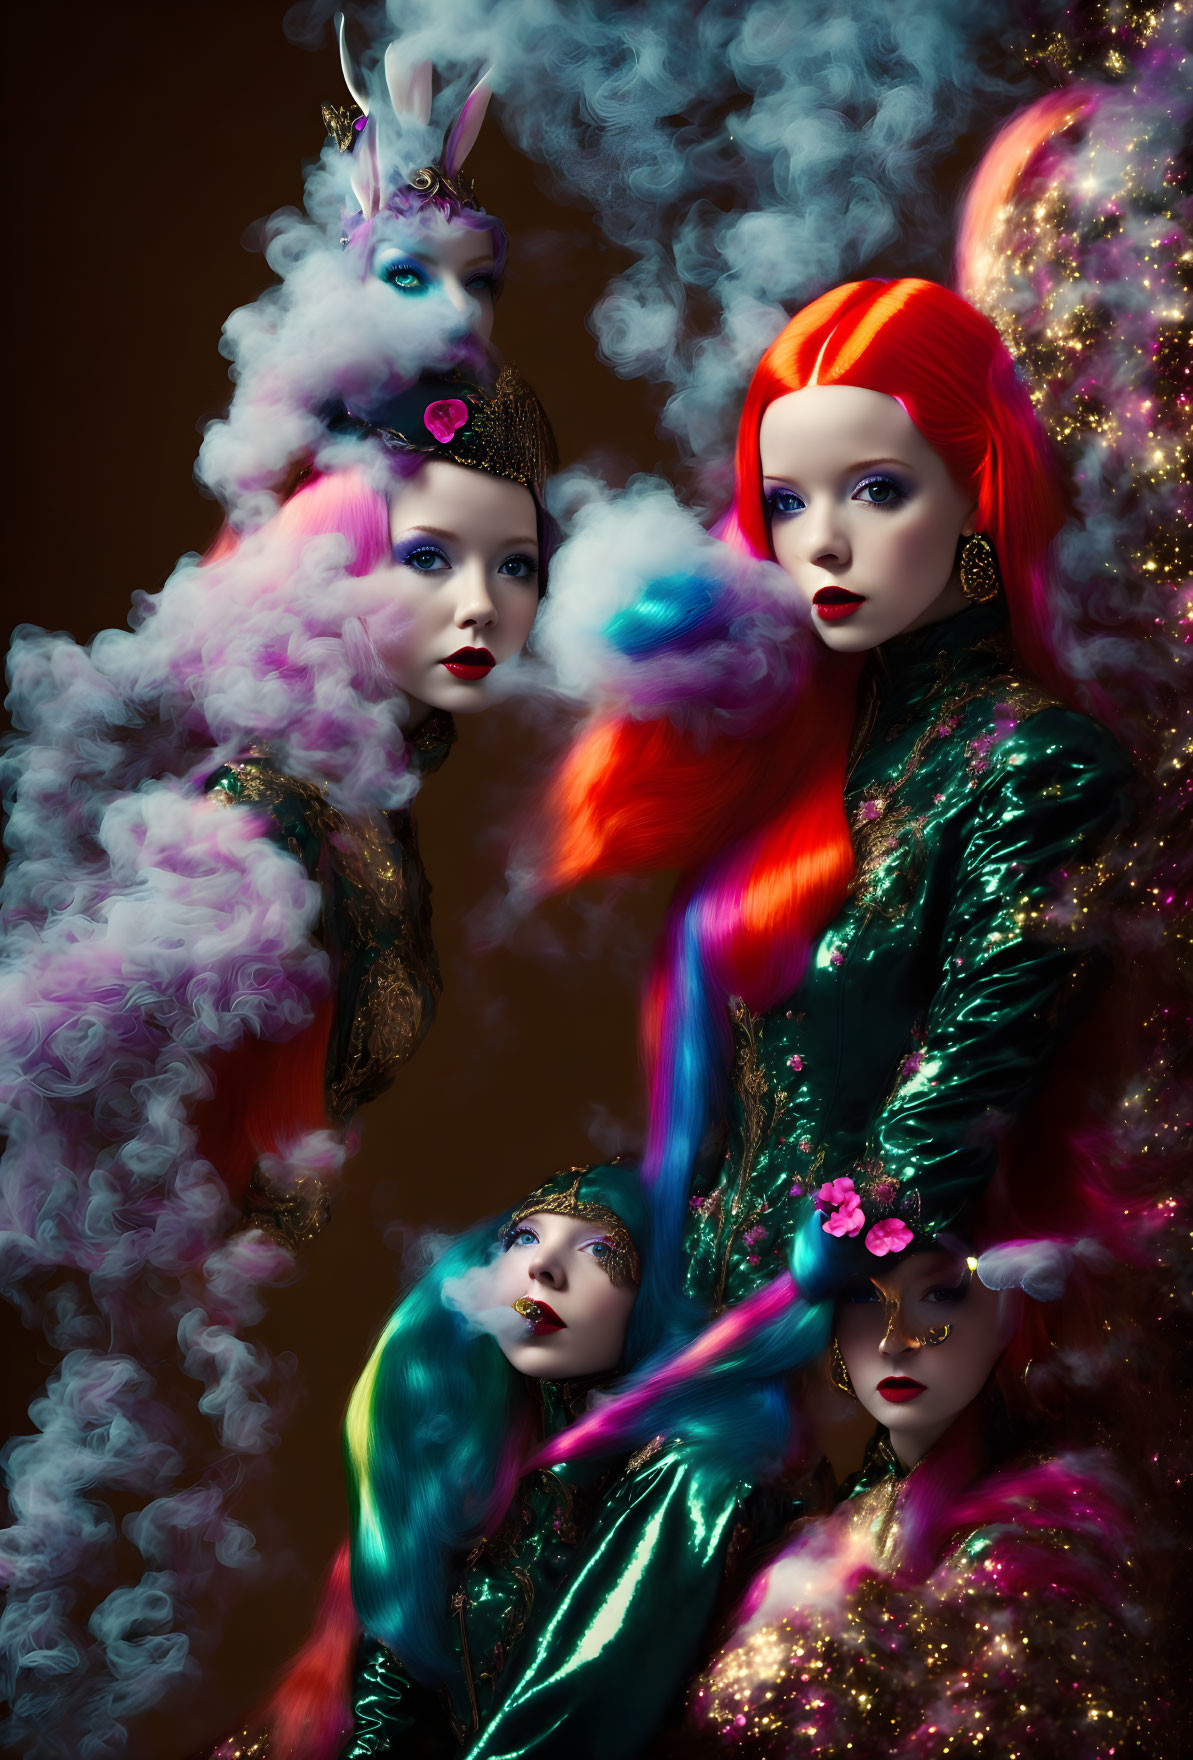 Vibrant fantasy makeup on four models with colorful hairstyles and glittery attire